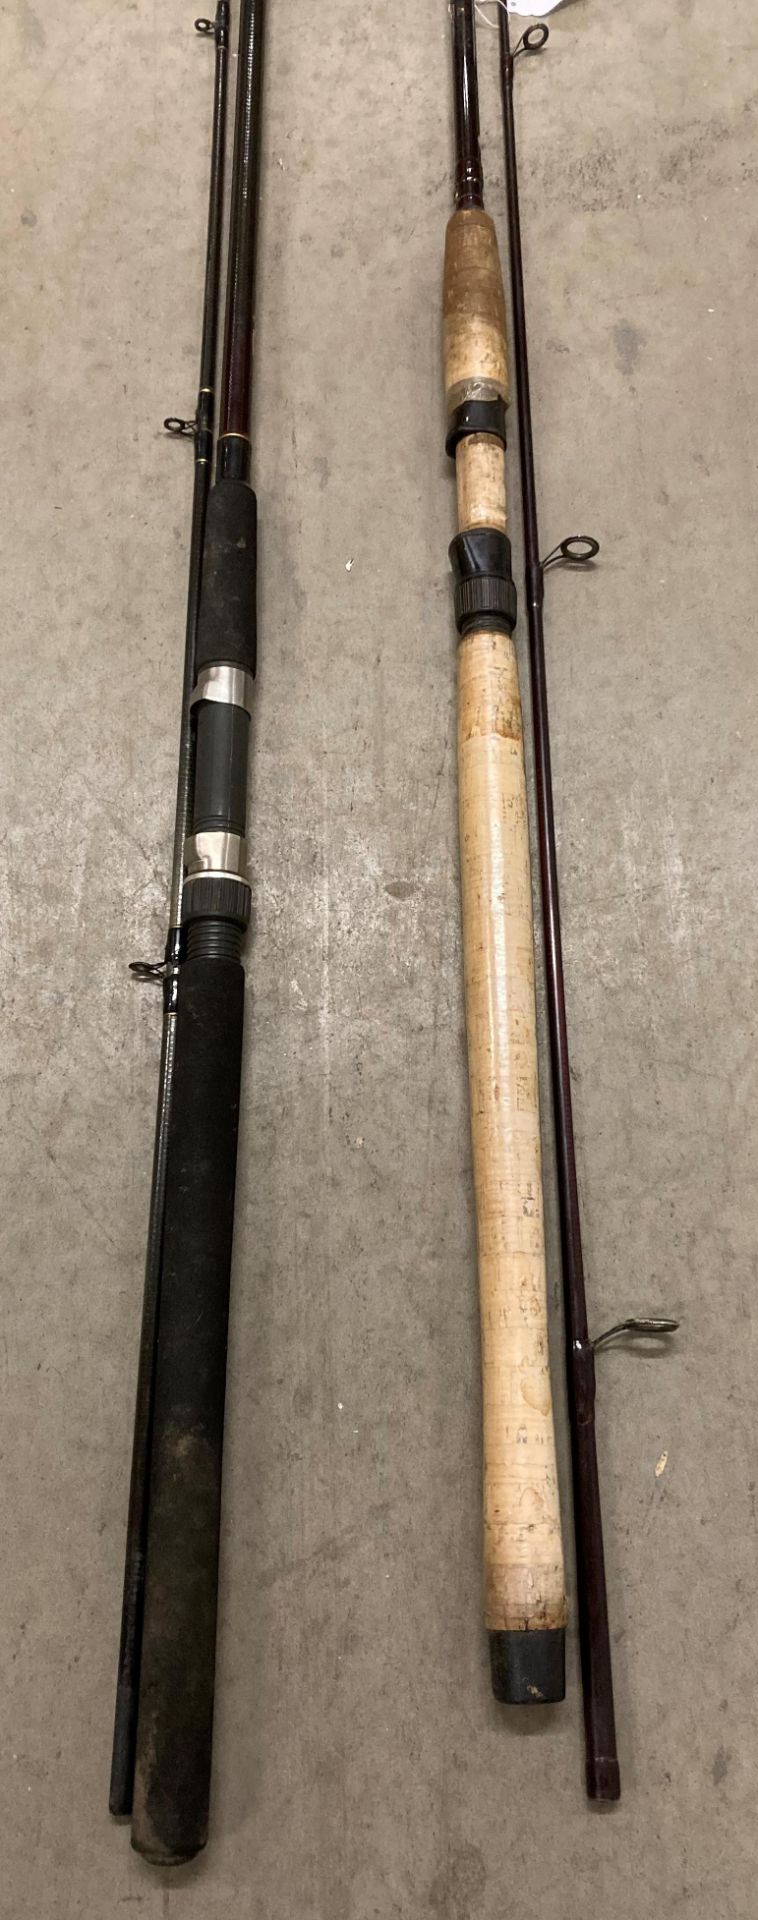 Two fishing rods by DAM - Fighter CF Picker 3m carbon 2-piece and a Shimano Stradic Super Graphite - Image 2 of 3